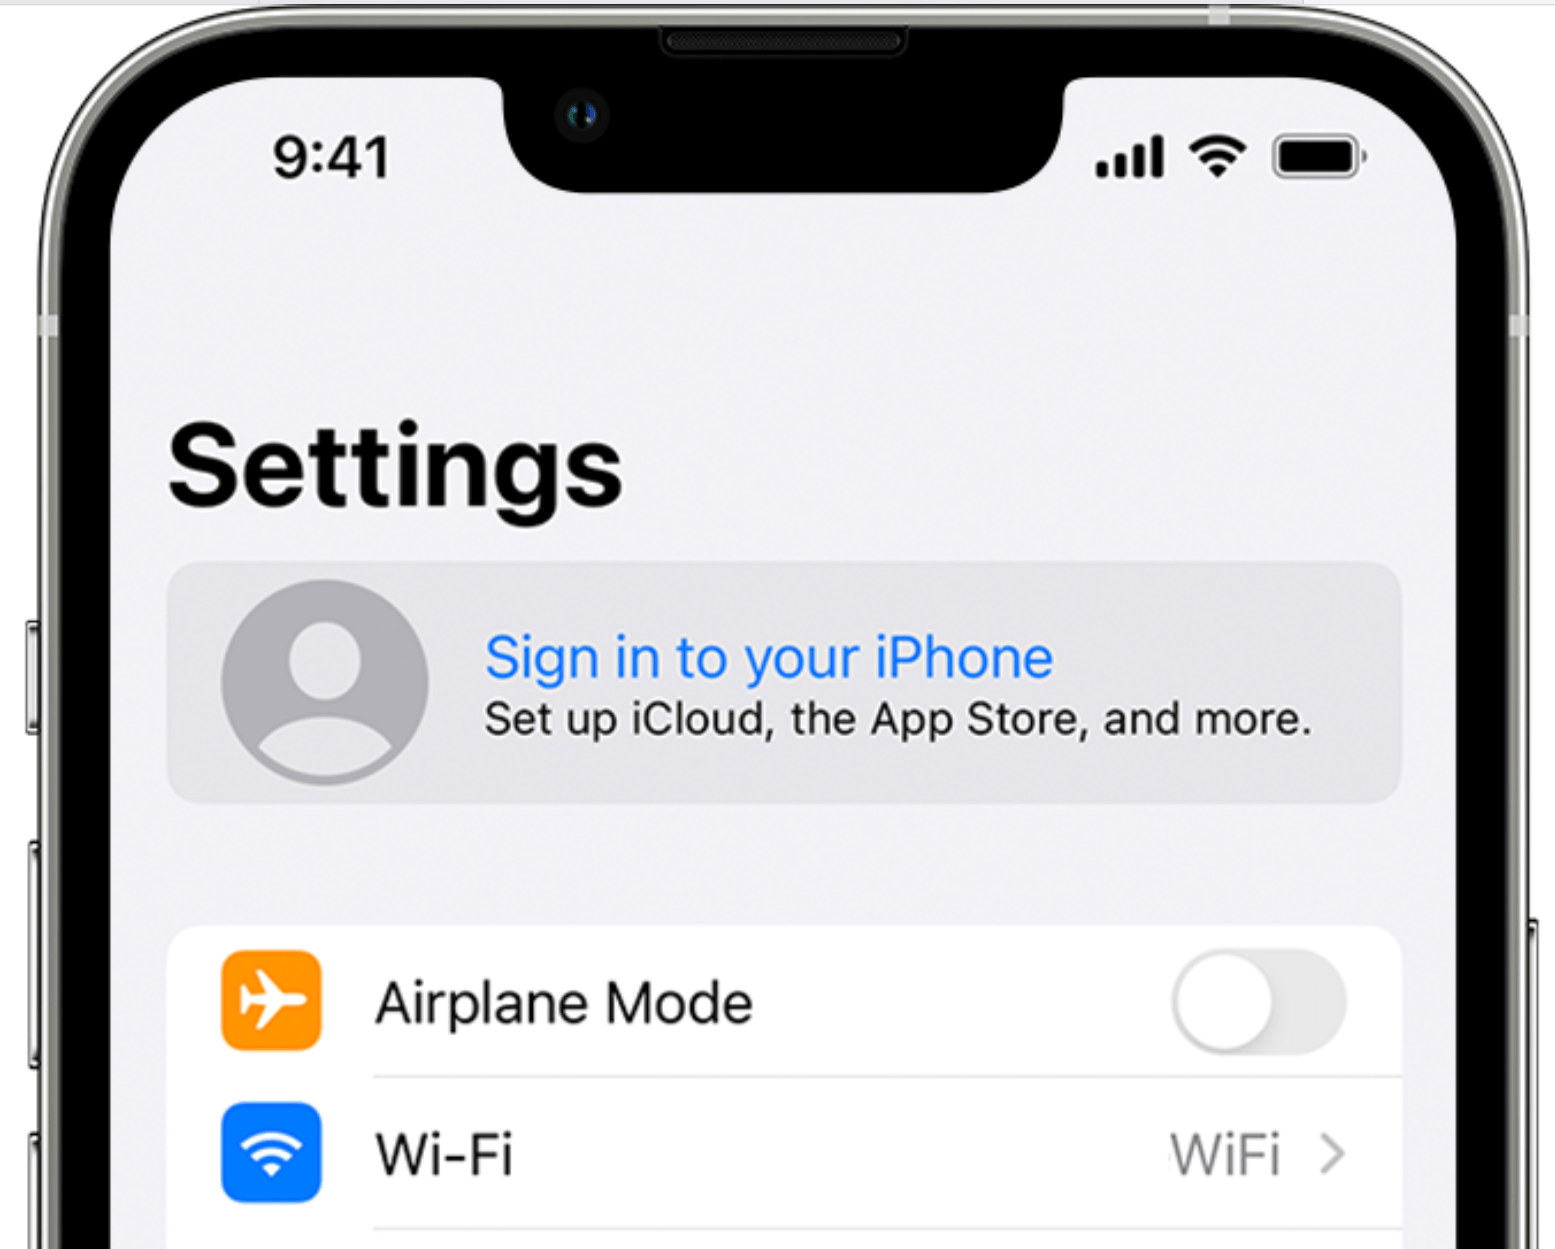 sign in to your iPhone